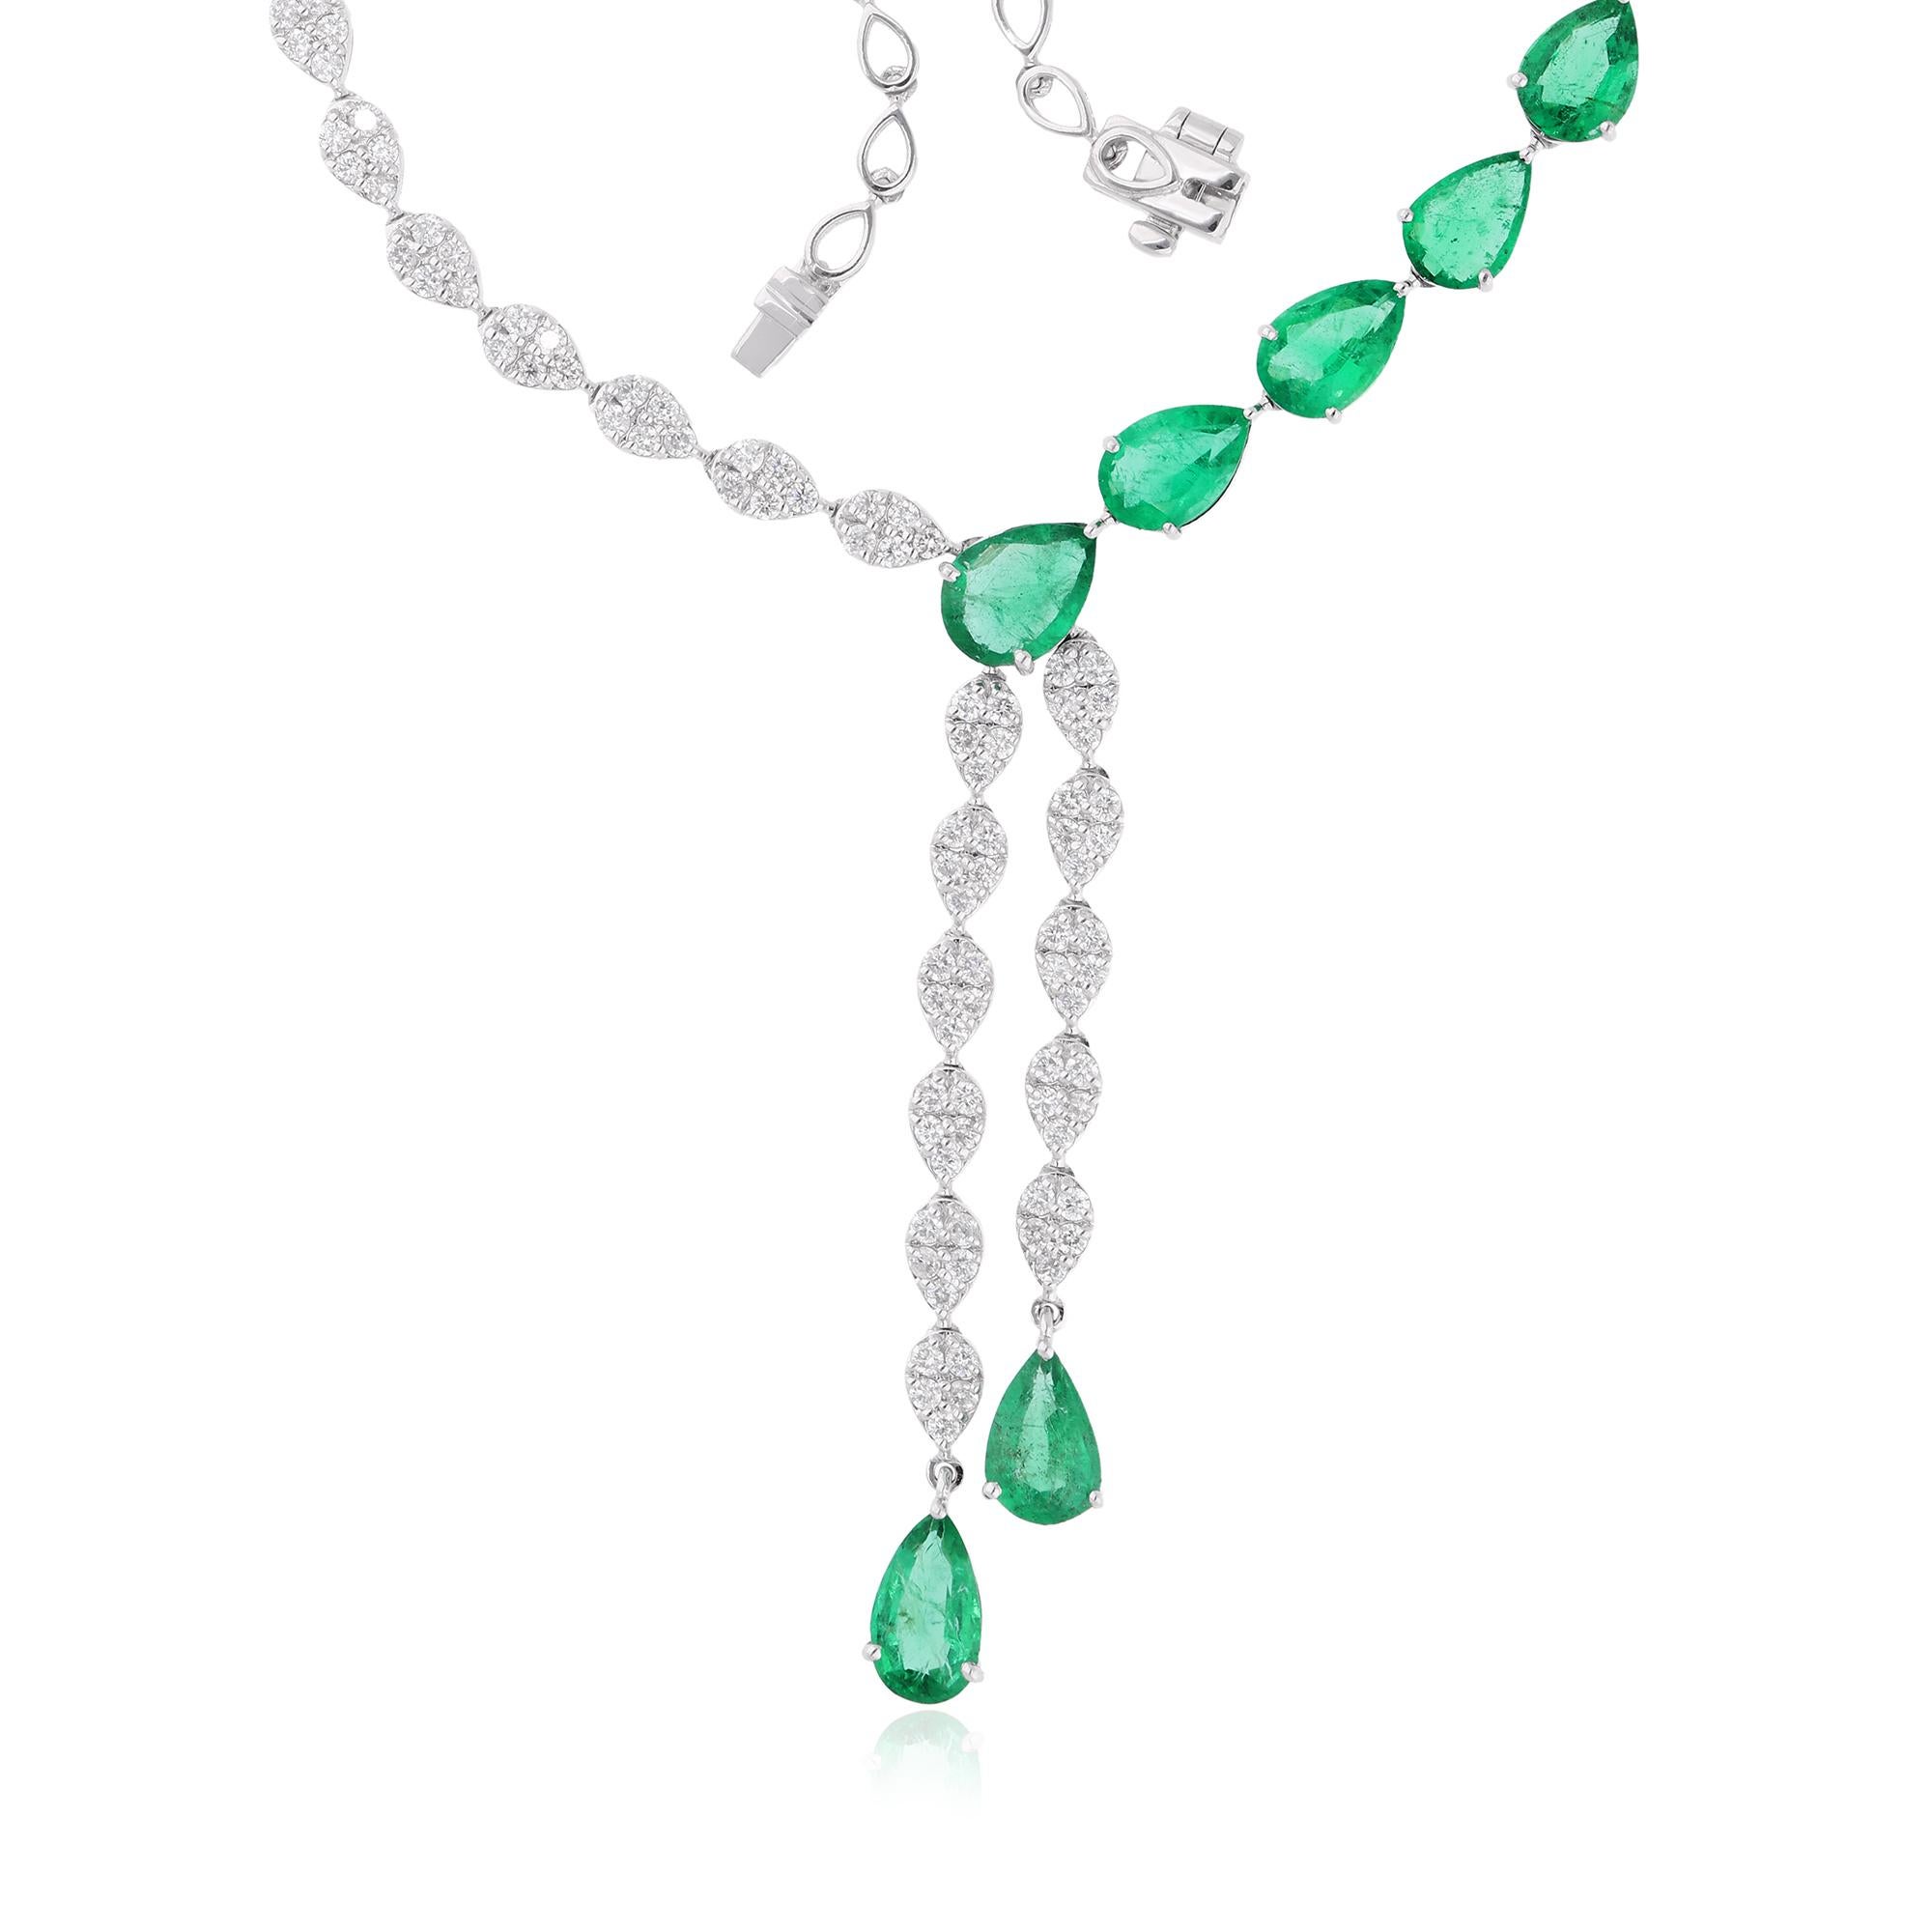 Immerse yourself in the mesmerizing beauty of nature's bounty with this exquisite Natural Zambian Emerald Necklace, adorned with pear-shaped diamonds and elegantly crafted in 14 karat white gold. Each element of this necklace is a celebration of the